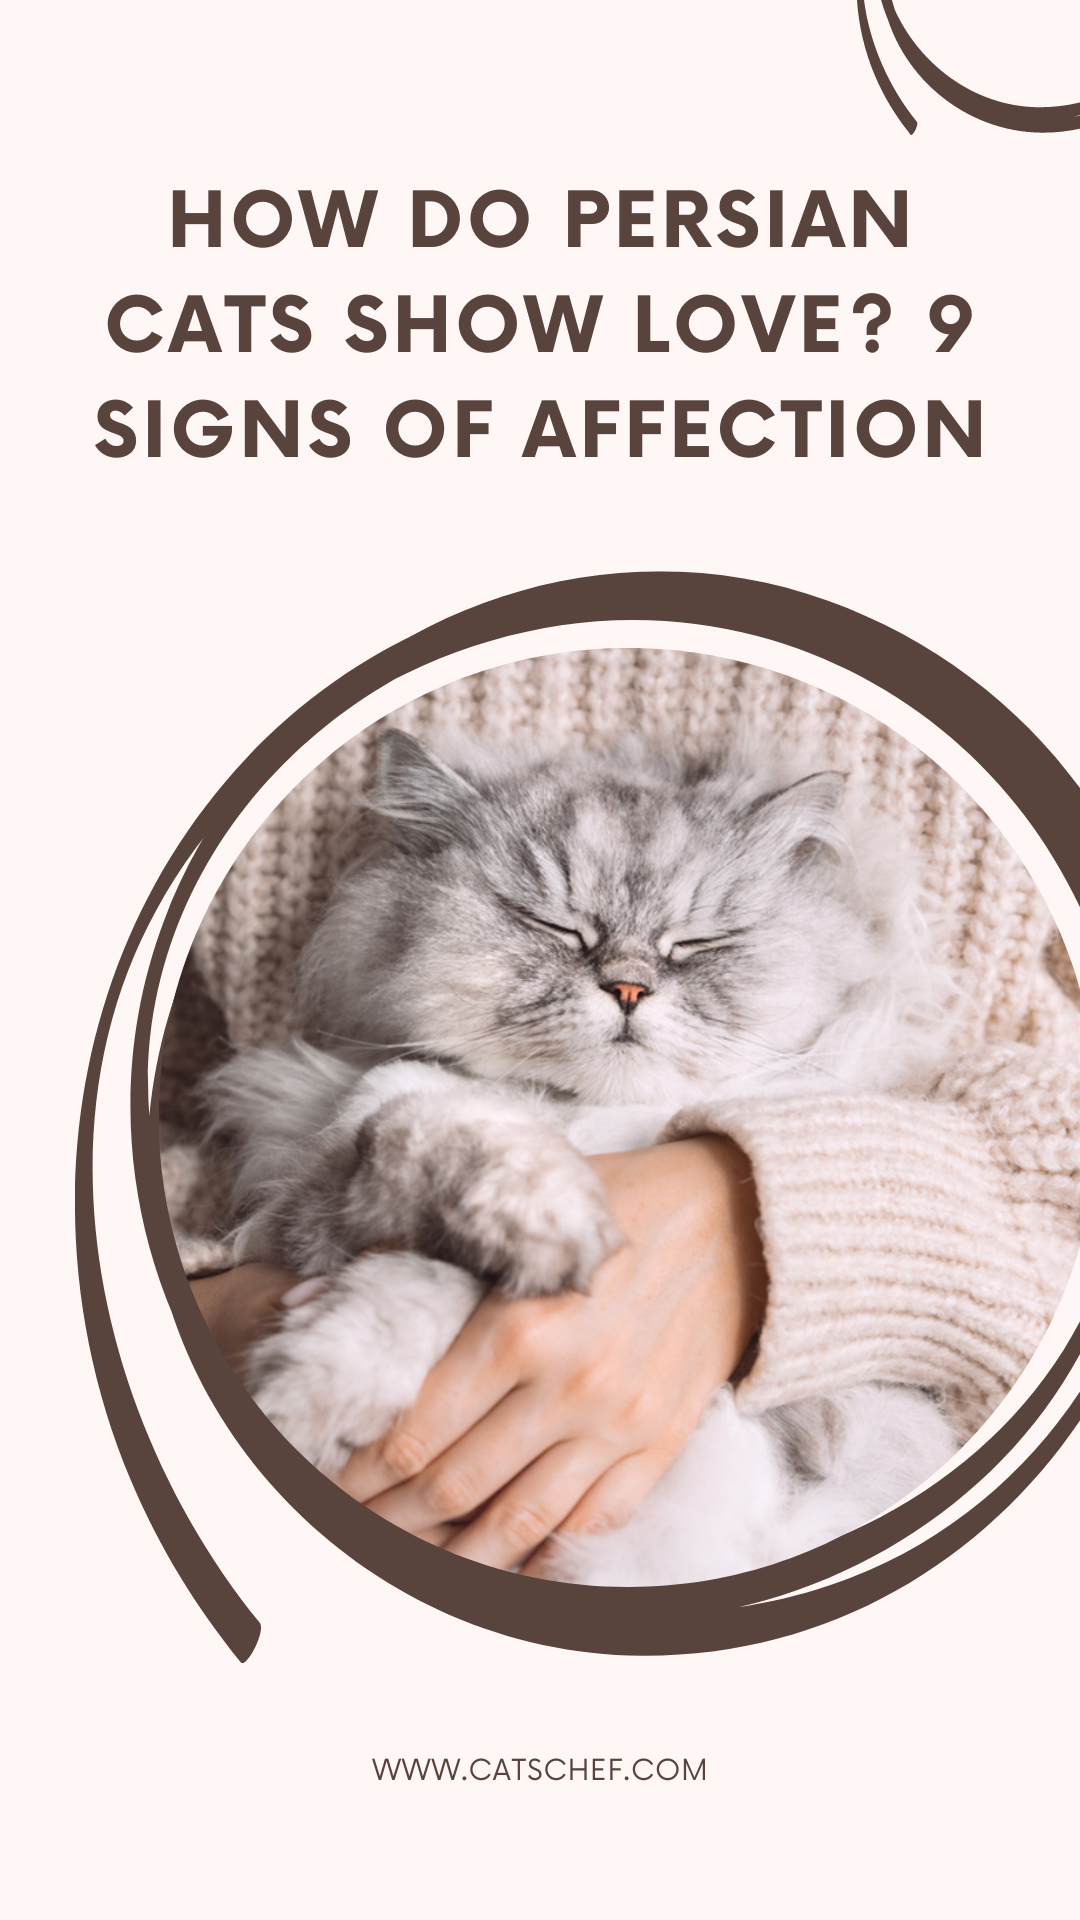 How Do Persian Cats Show Love? 9 Signs Of Affection